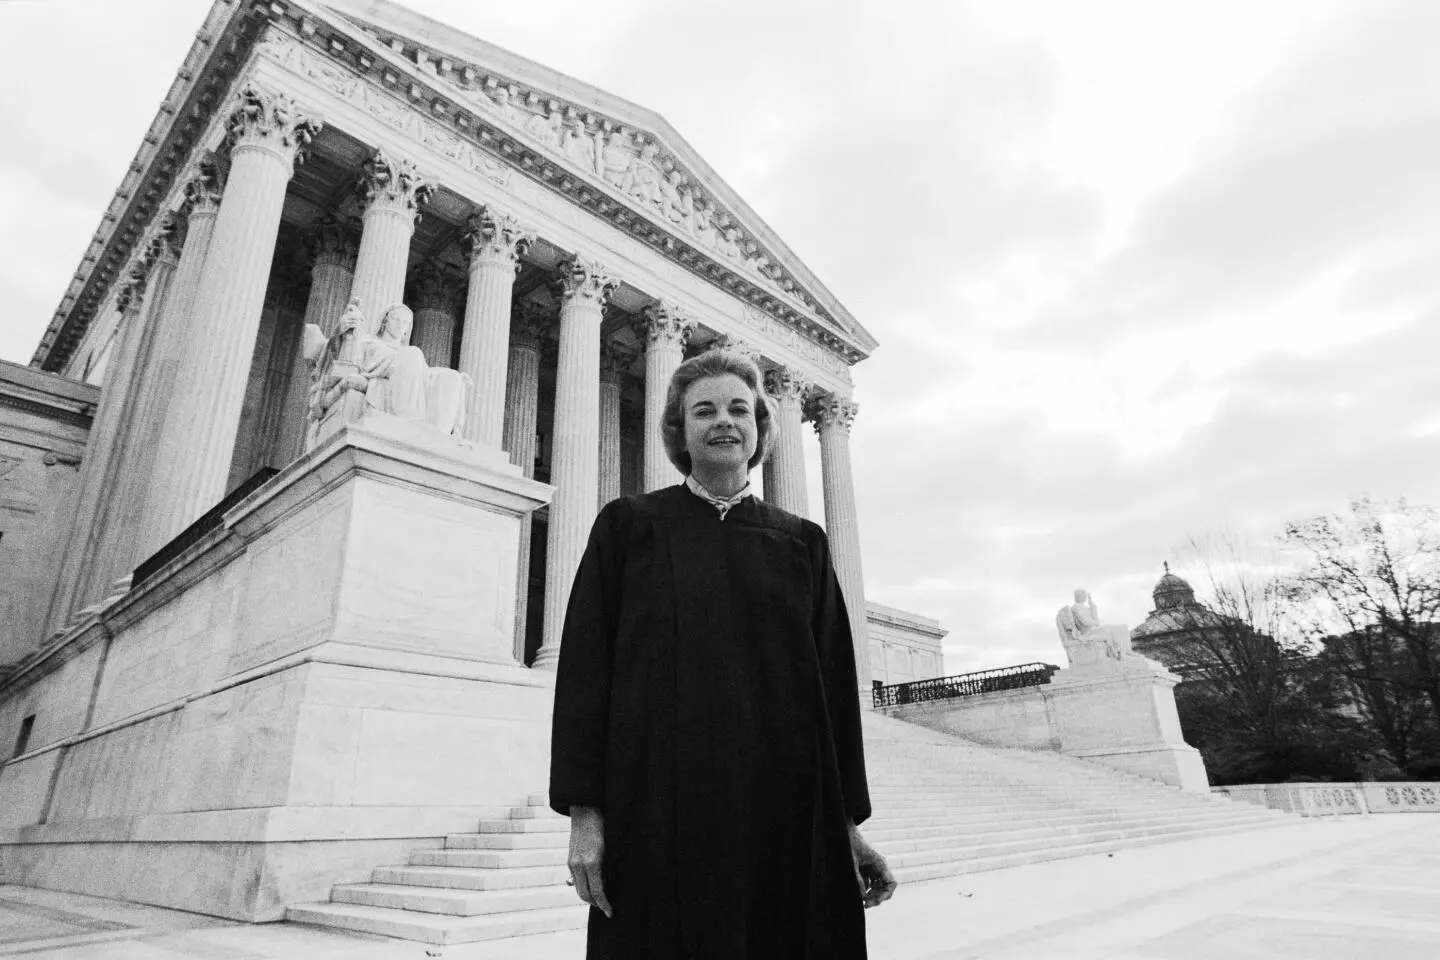 retired-us-supreme-court-justice-sandra-day-oconnor-passed-away-at-93